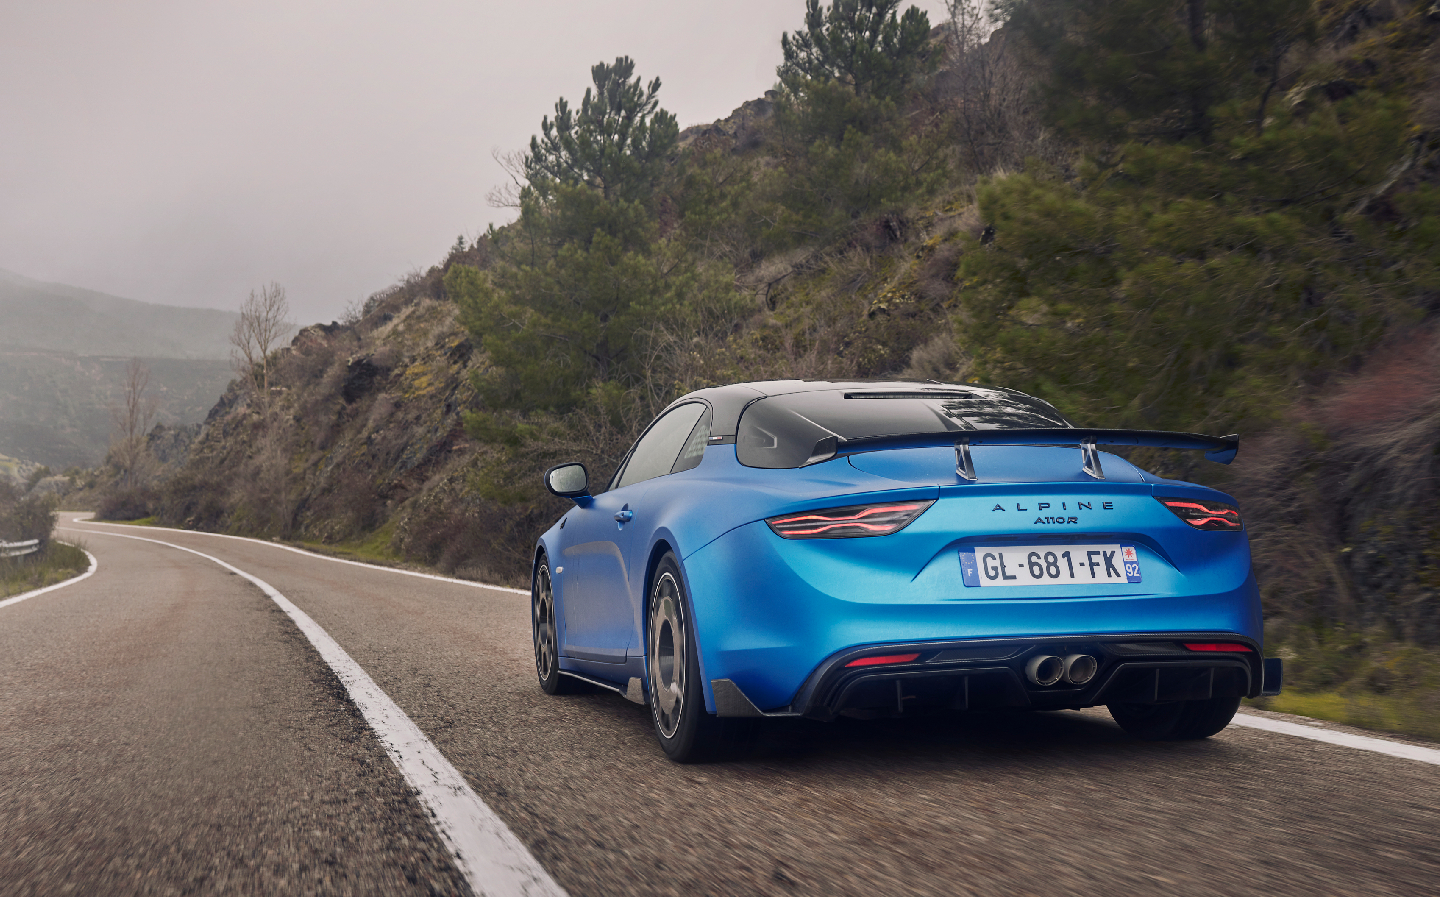 Alpine A110 R on the road, rear shot, action